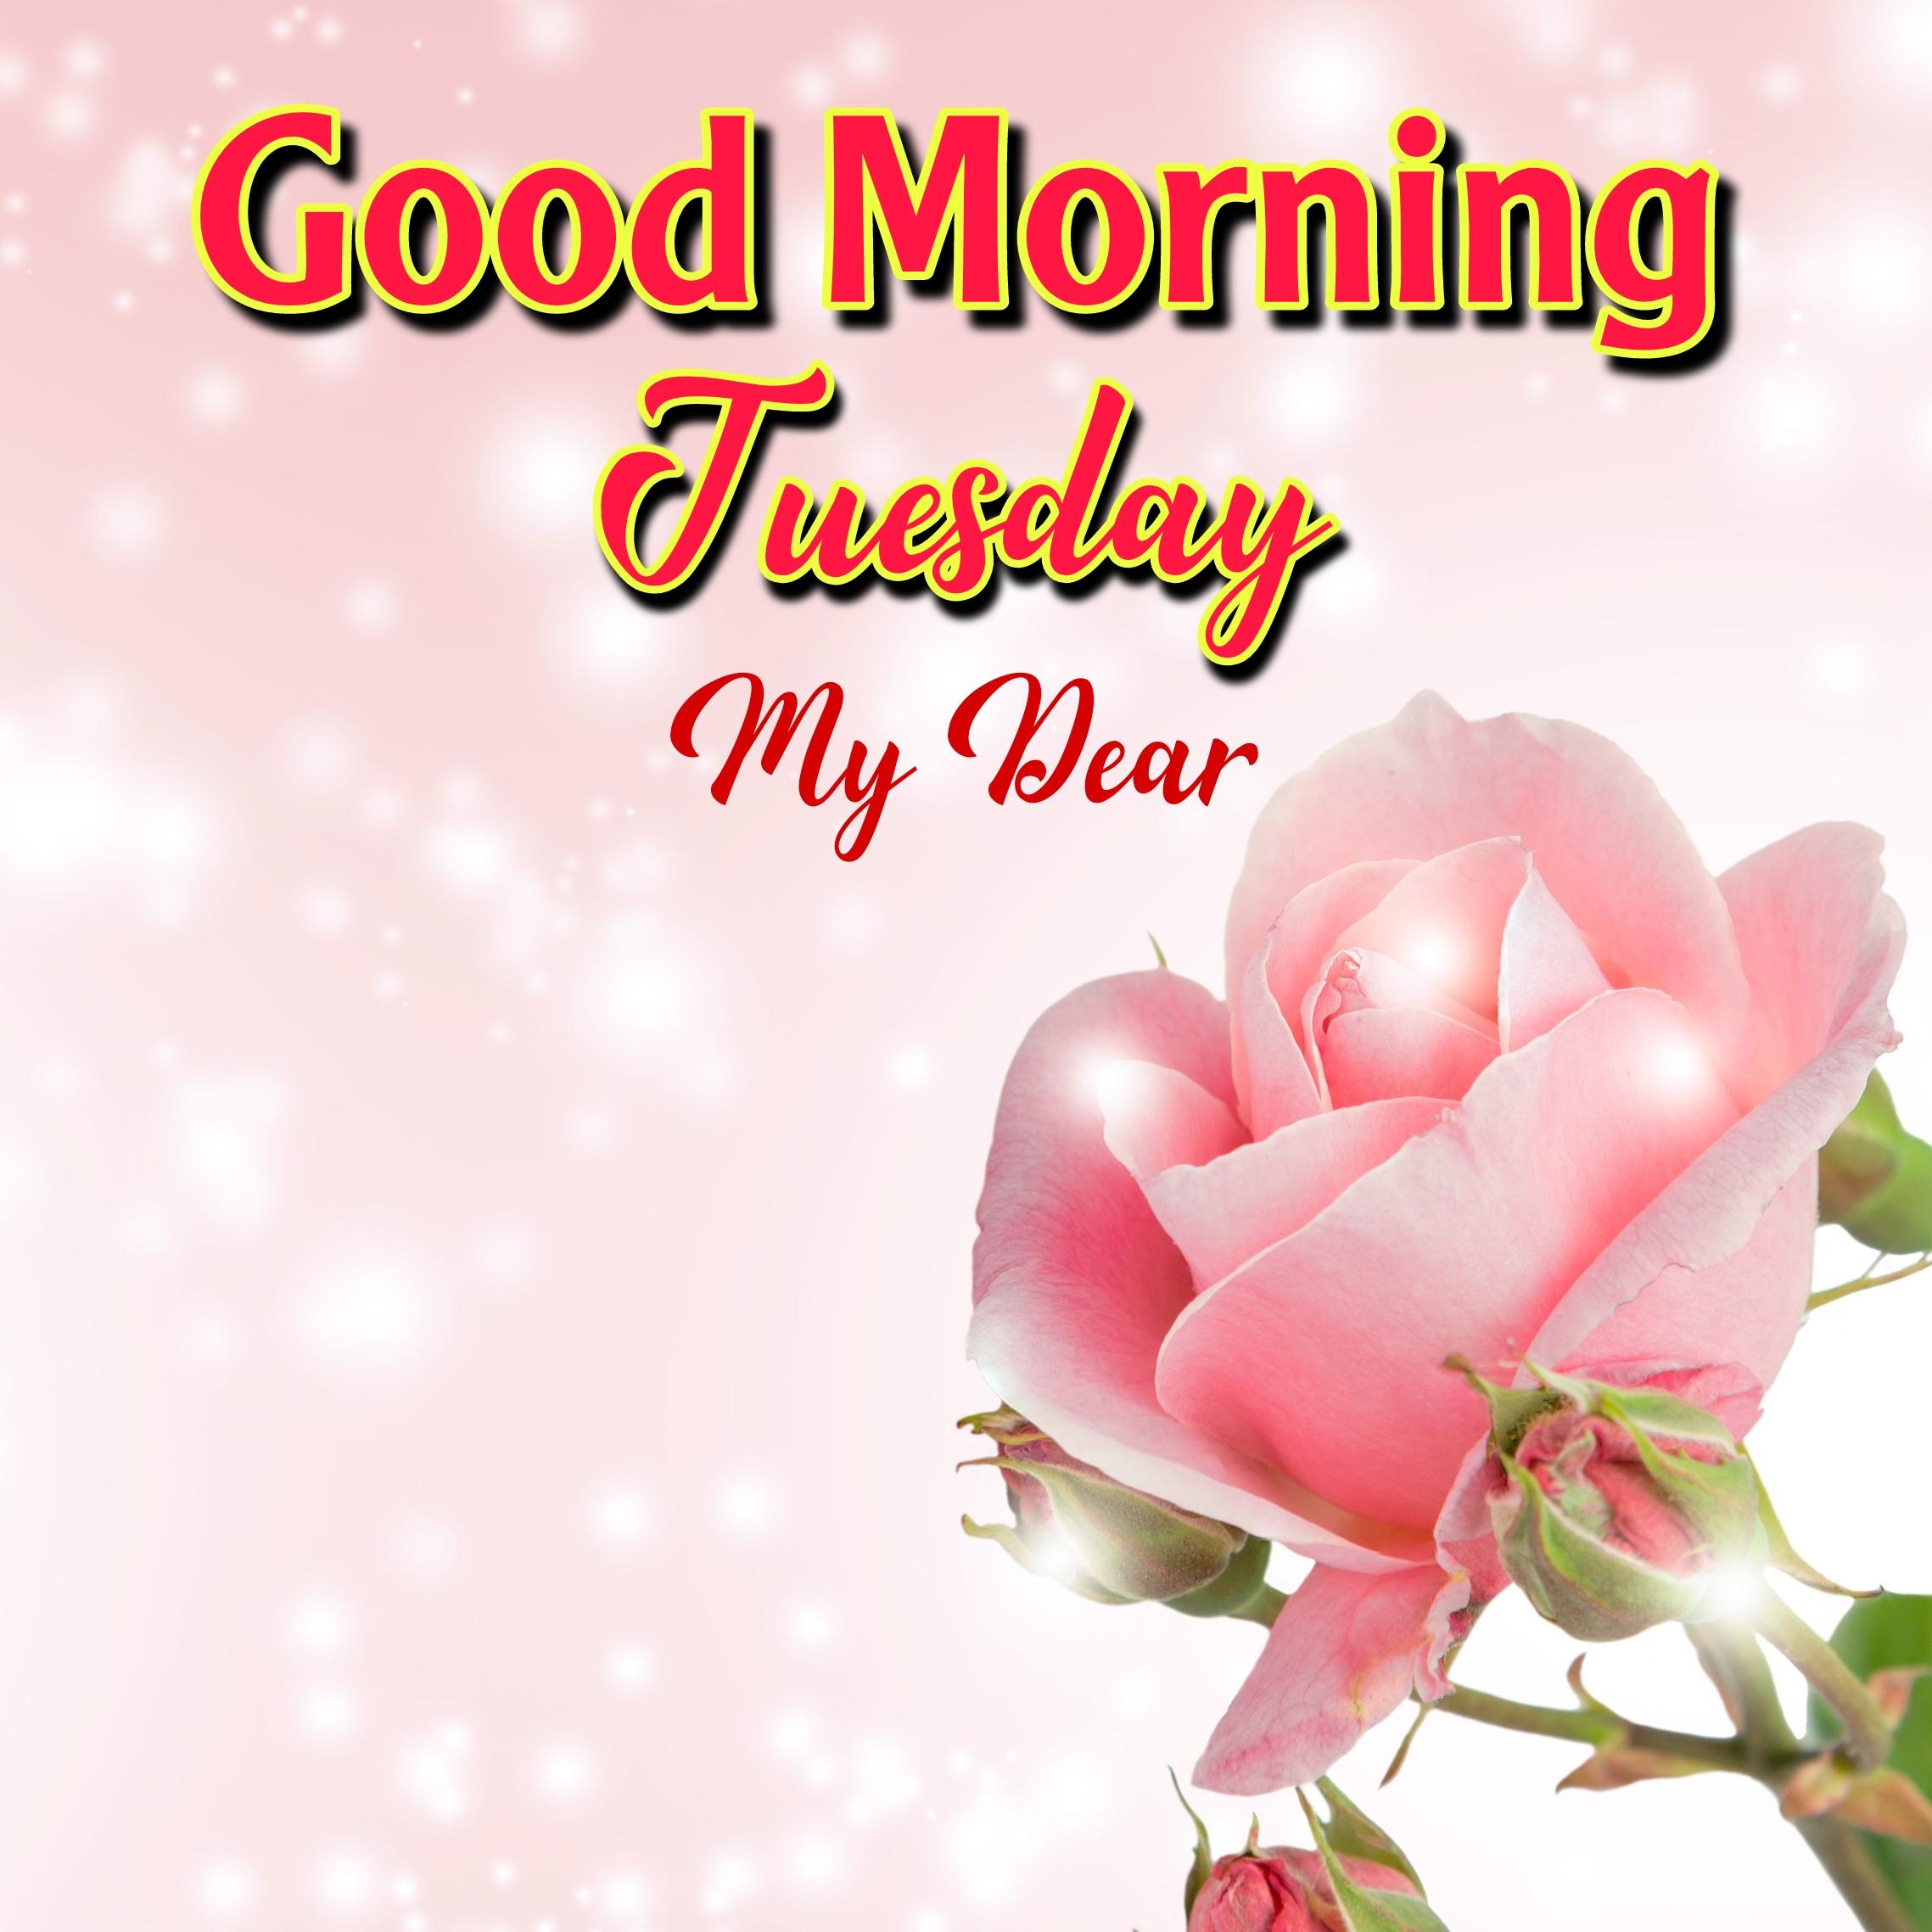 Good Morning Tuesday My dear Images